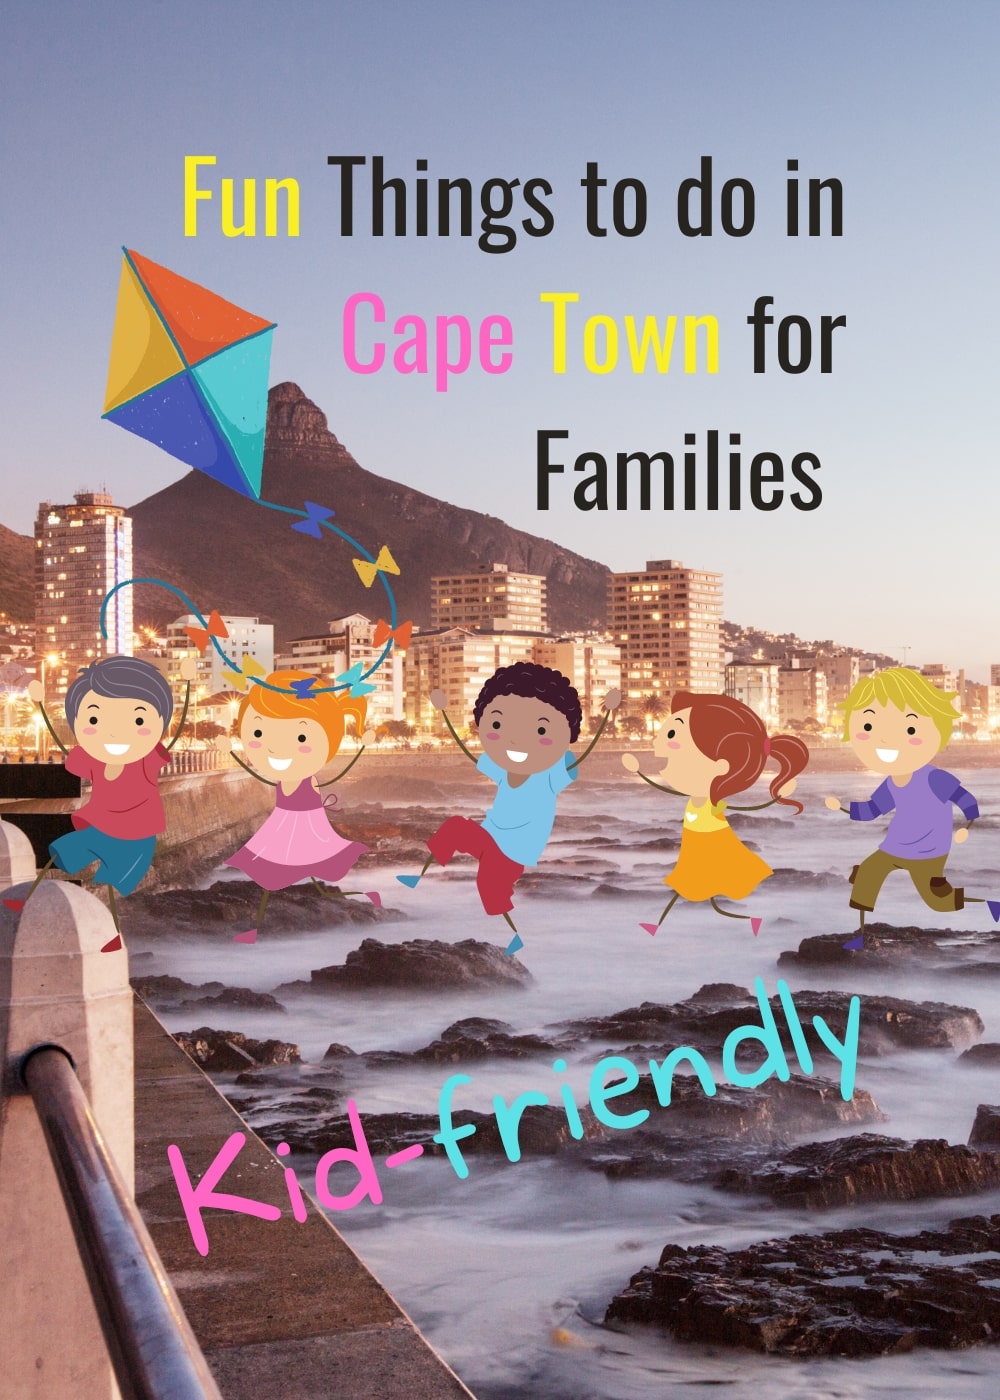 Fun things to do with kids in Cape Town Fun things to do in Cape Town for Families min